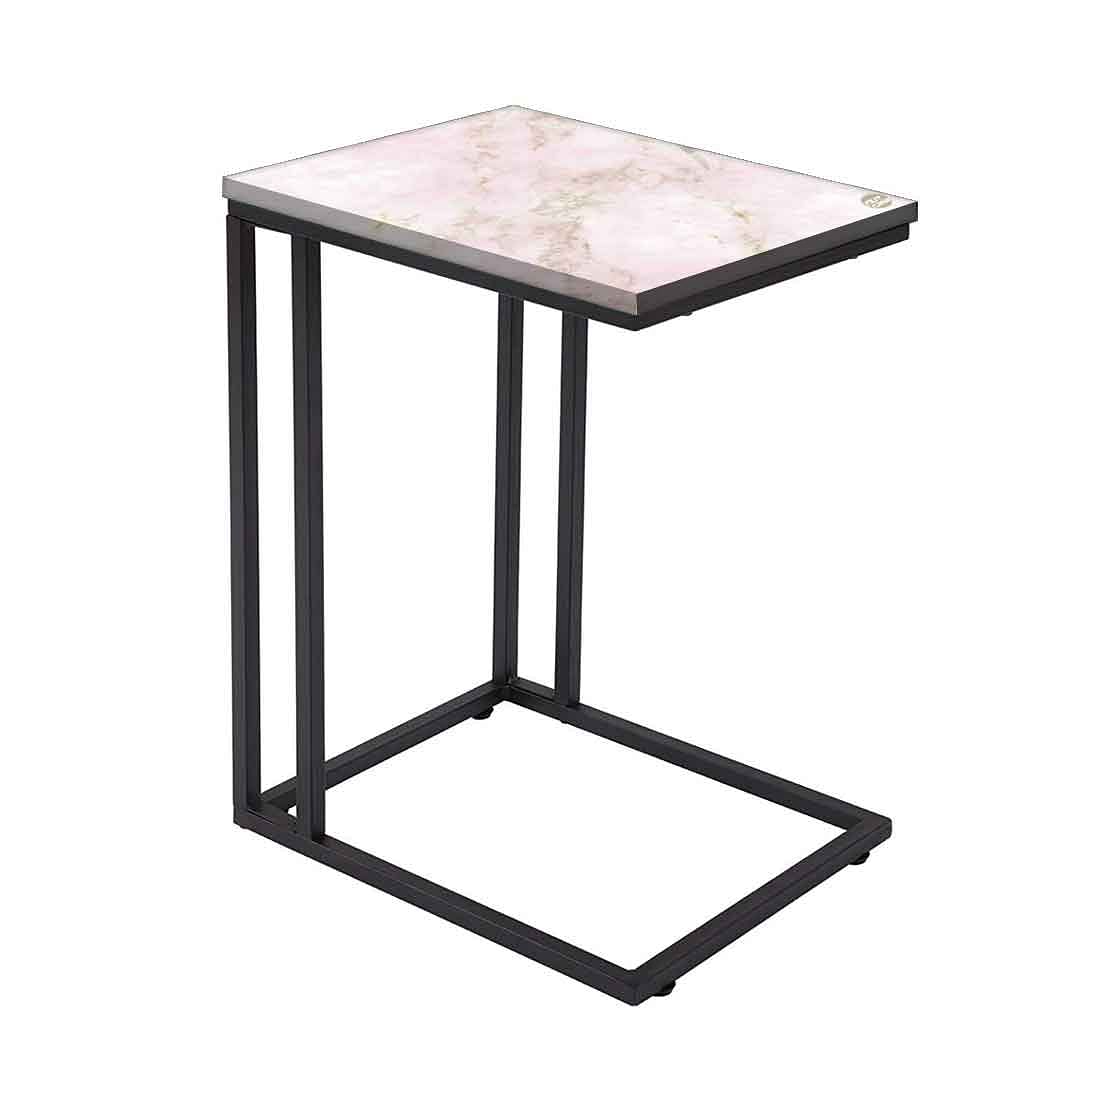 Marble C Shaped Table -Digital Print - Not Real Marble - Pink Effect Nutcase